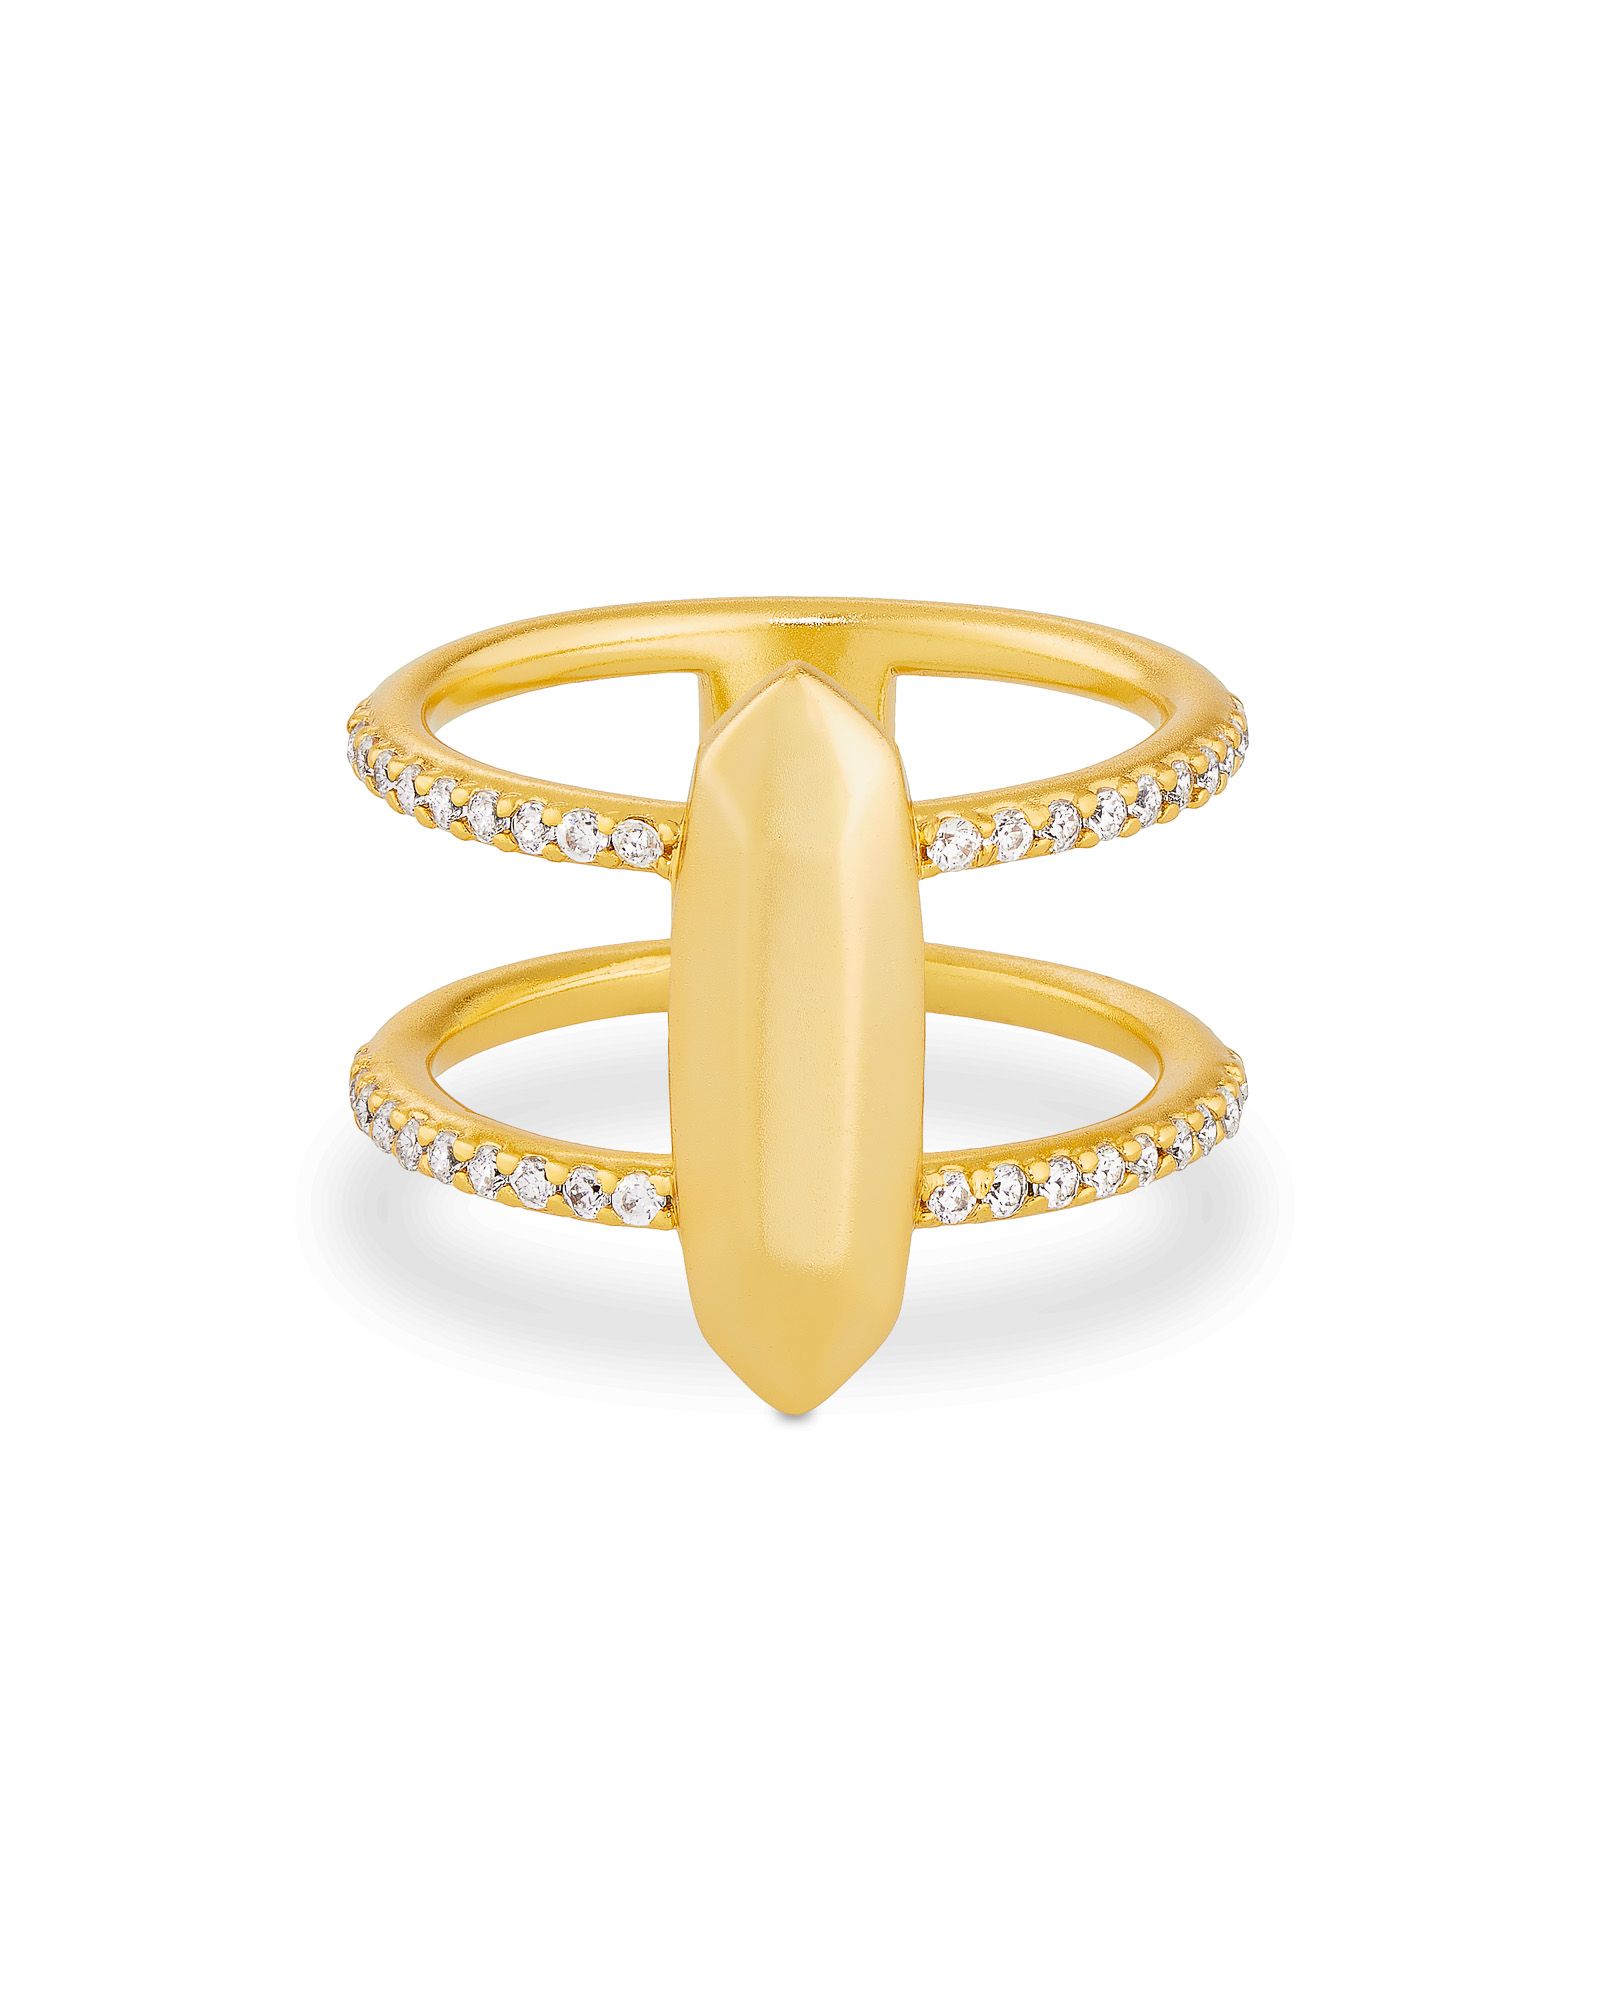 Abra Gold Double Band Ring in White Crystal | Kendra Scott | Kendra Scott